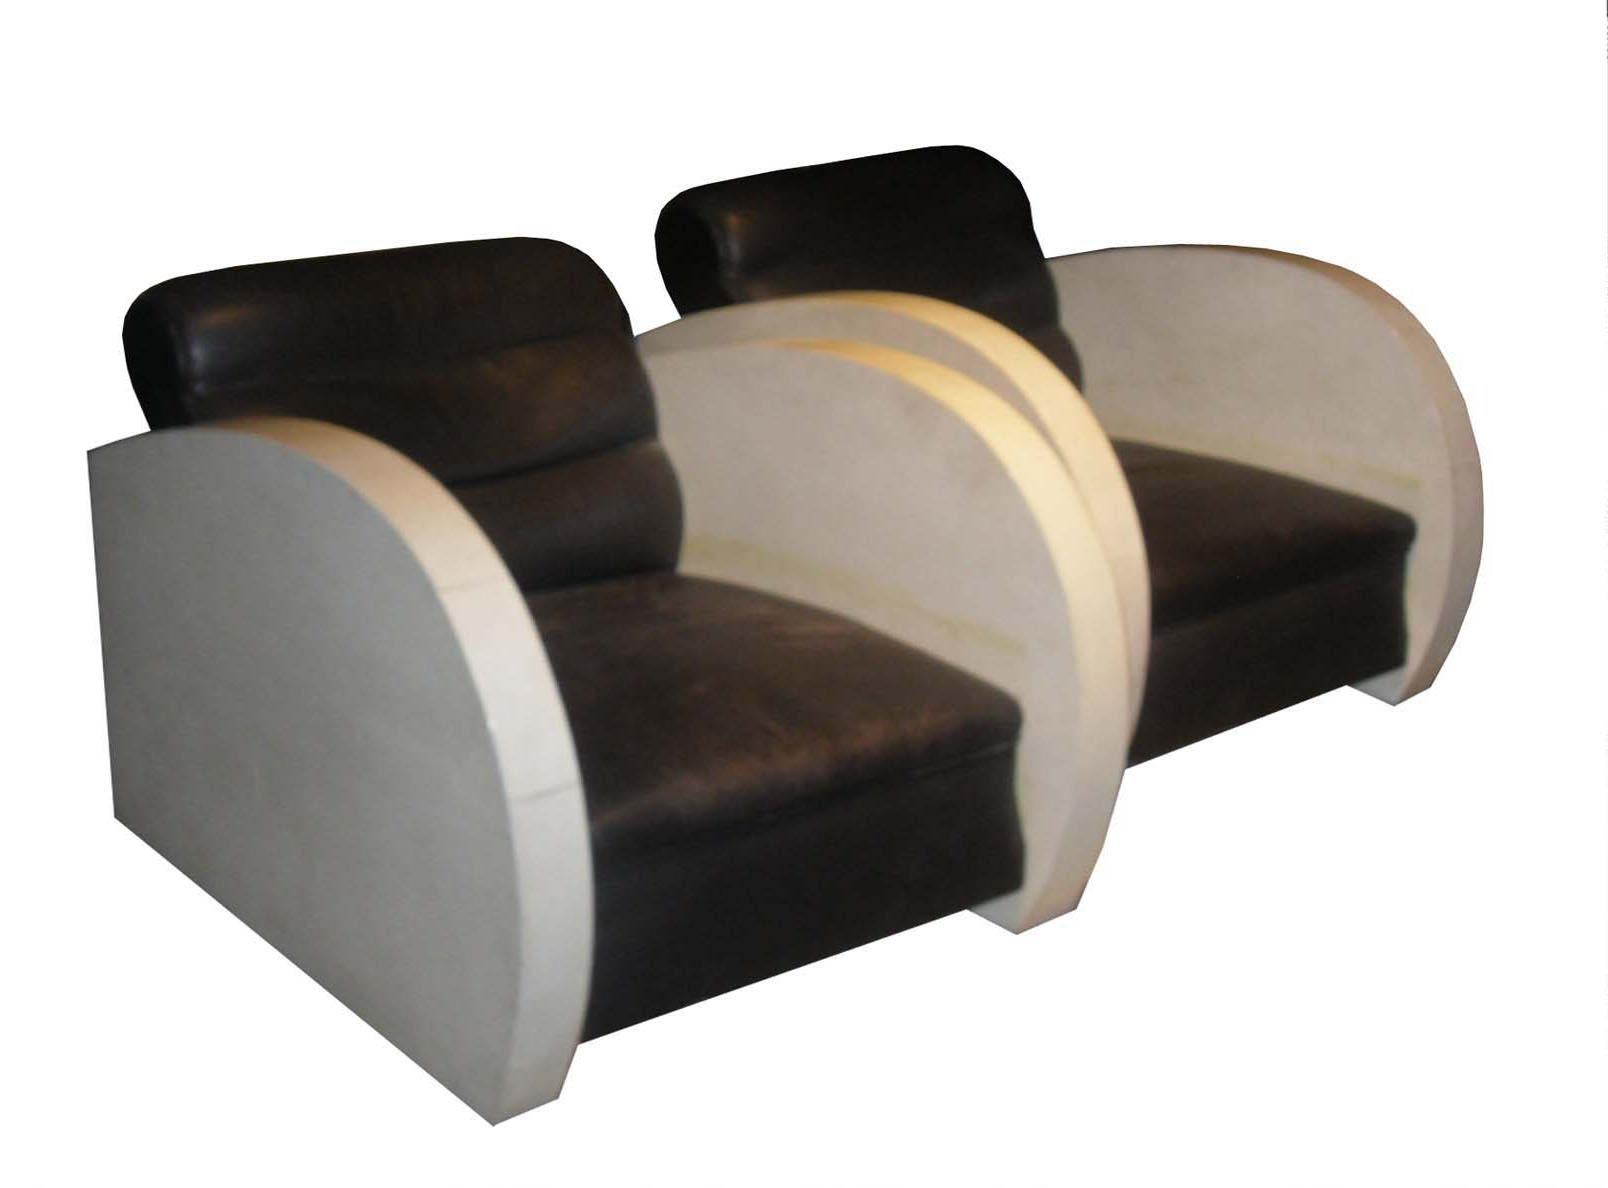 Mid-20th Century Pair of Art Deco Club Chairs in Parchment and Black Leather For Sale